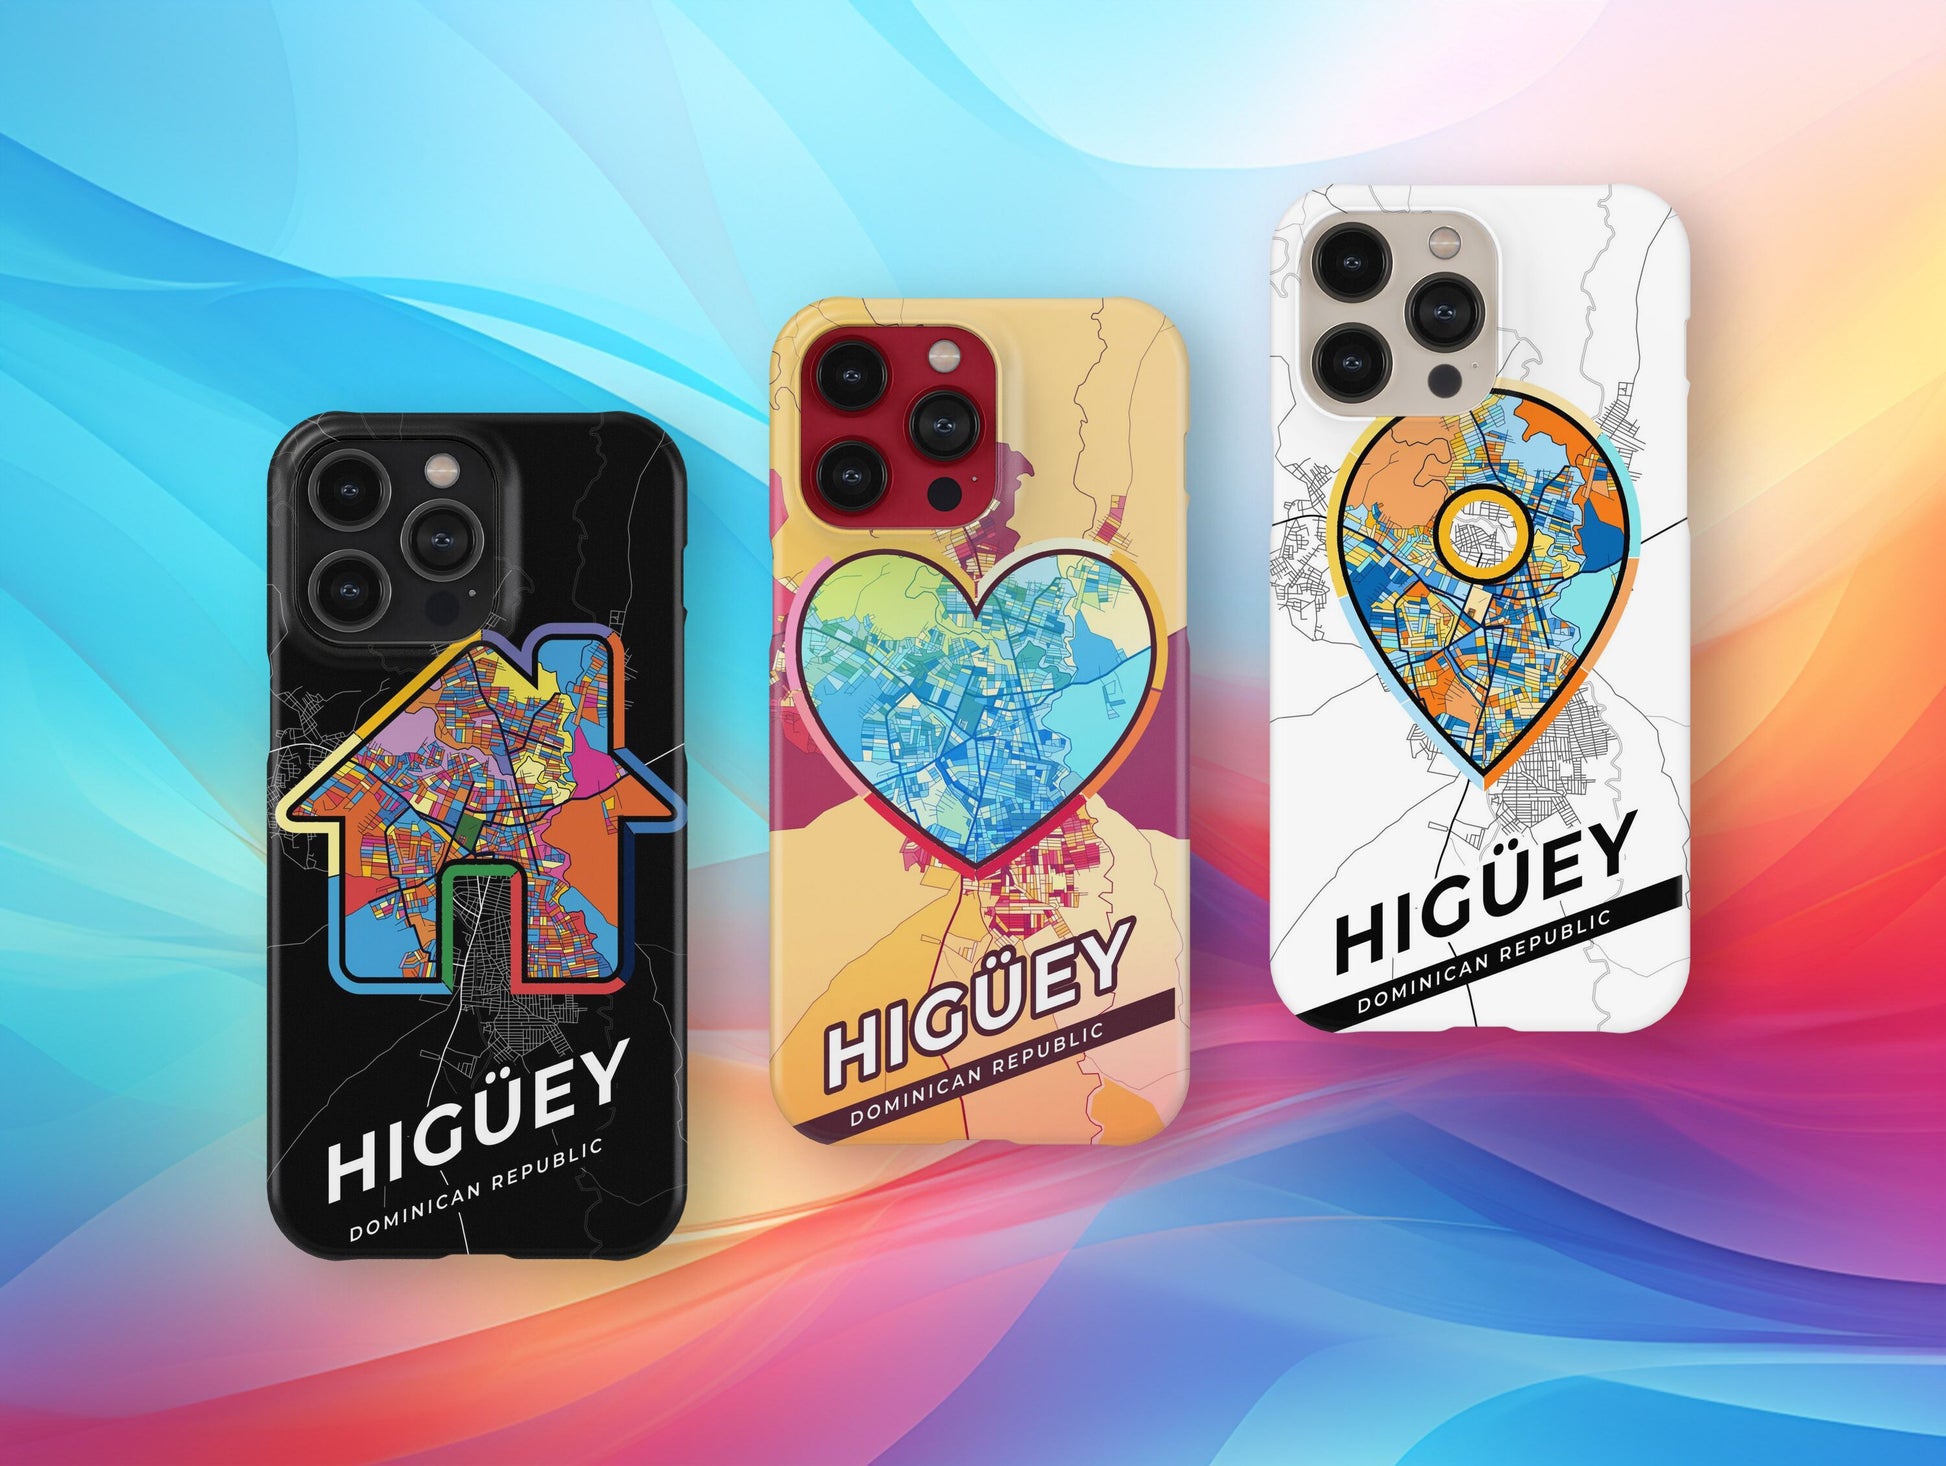 Higüey Dominican Republic slim phone case with colorful icon. Birthday, wedding or housewarming gift. Couple match cases.